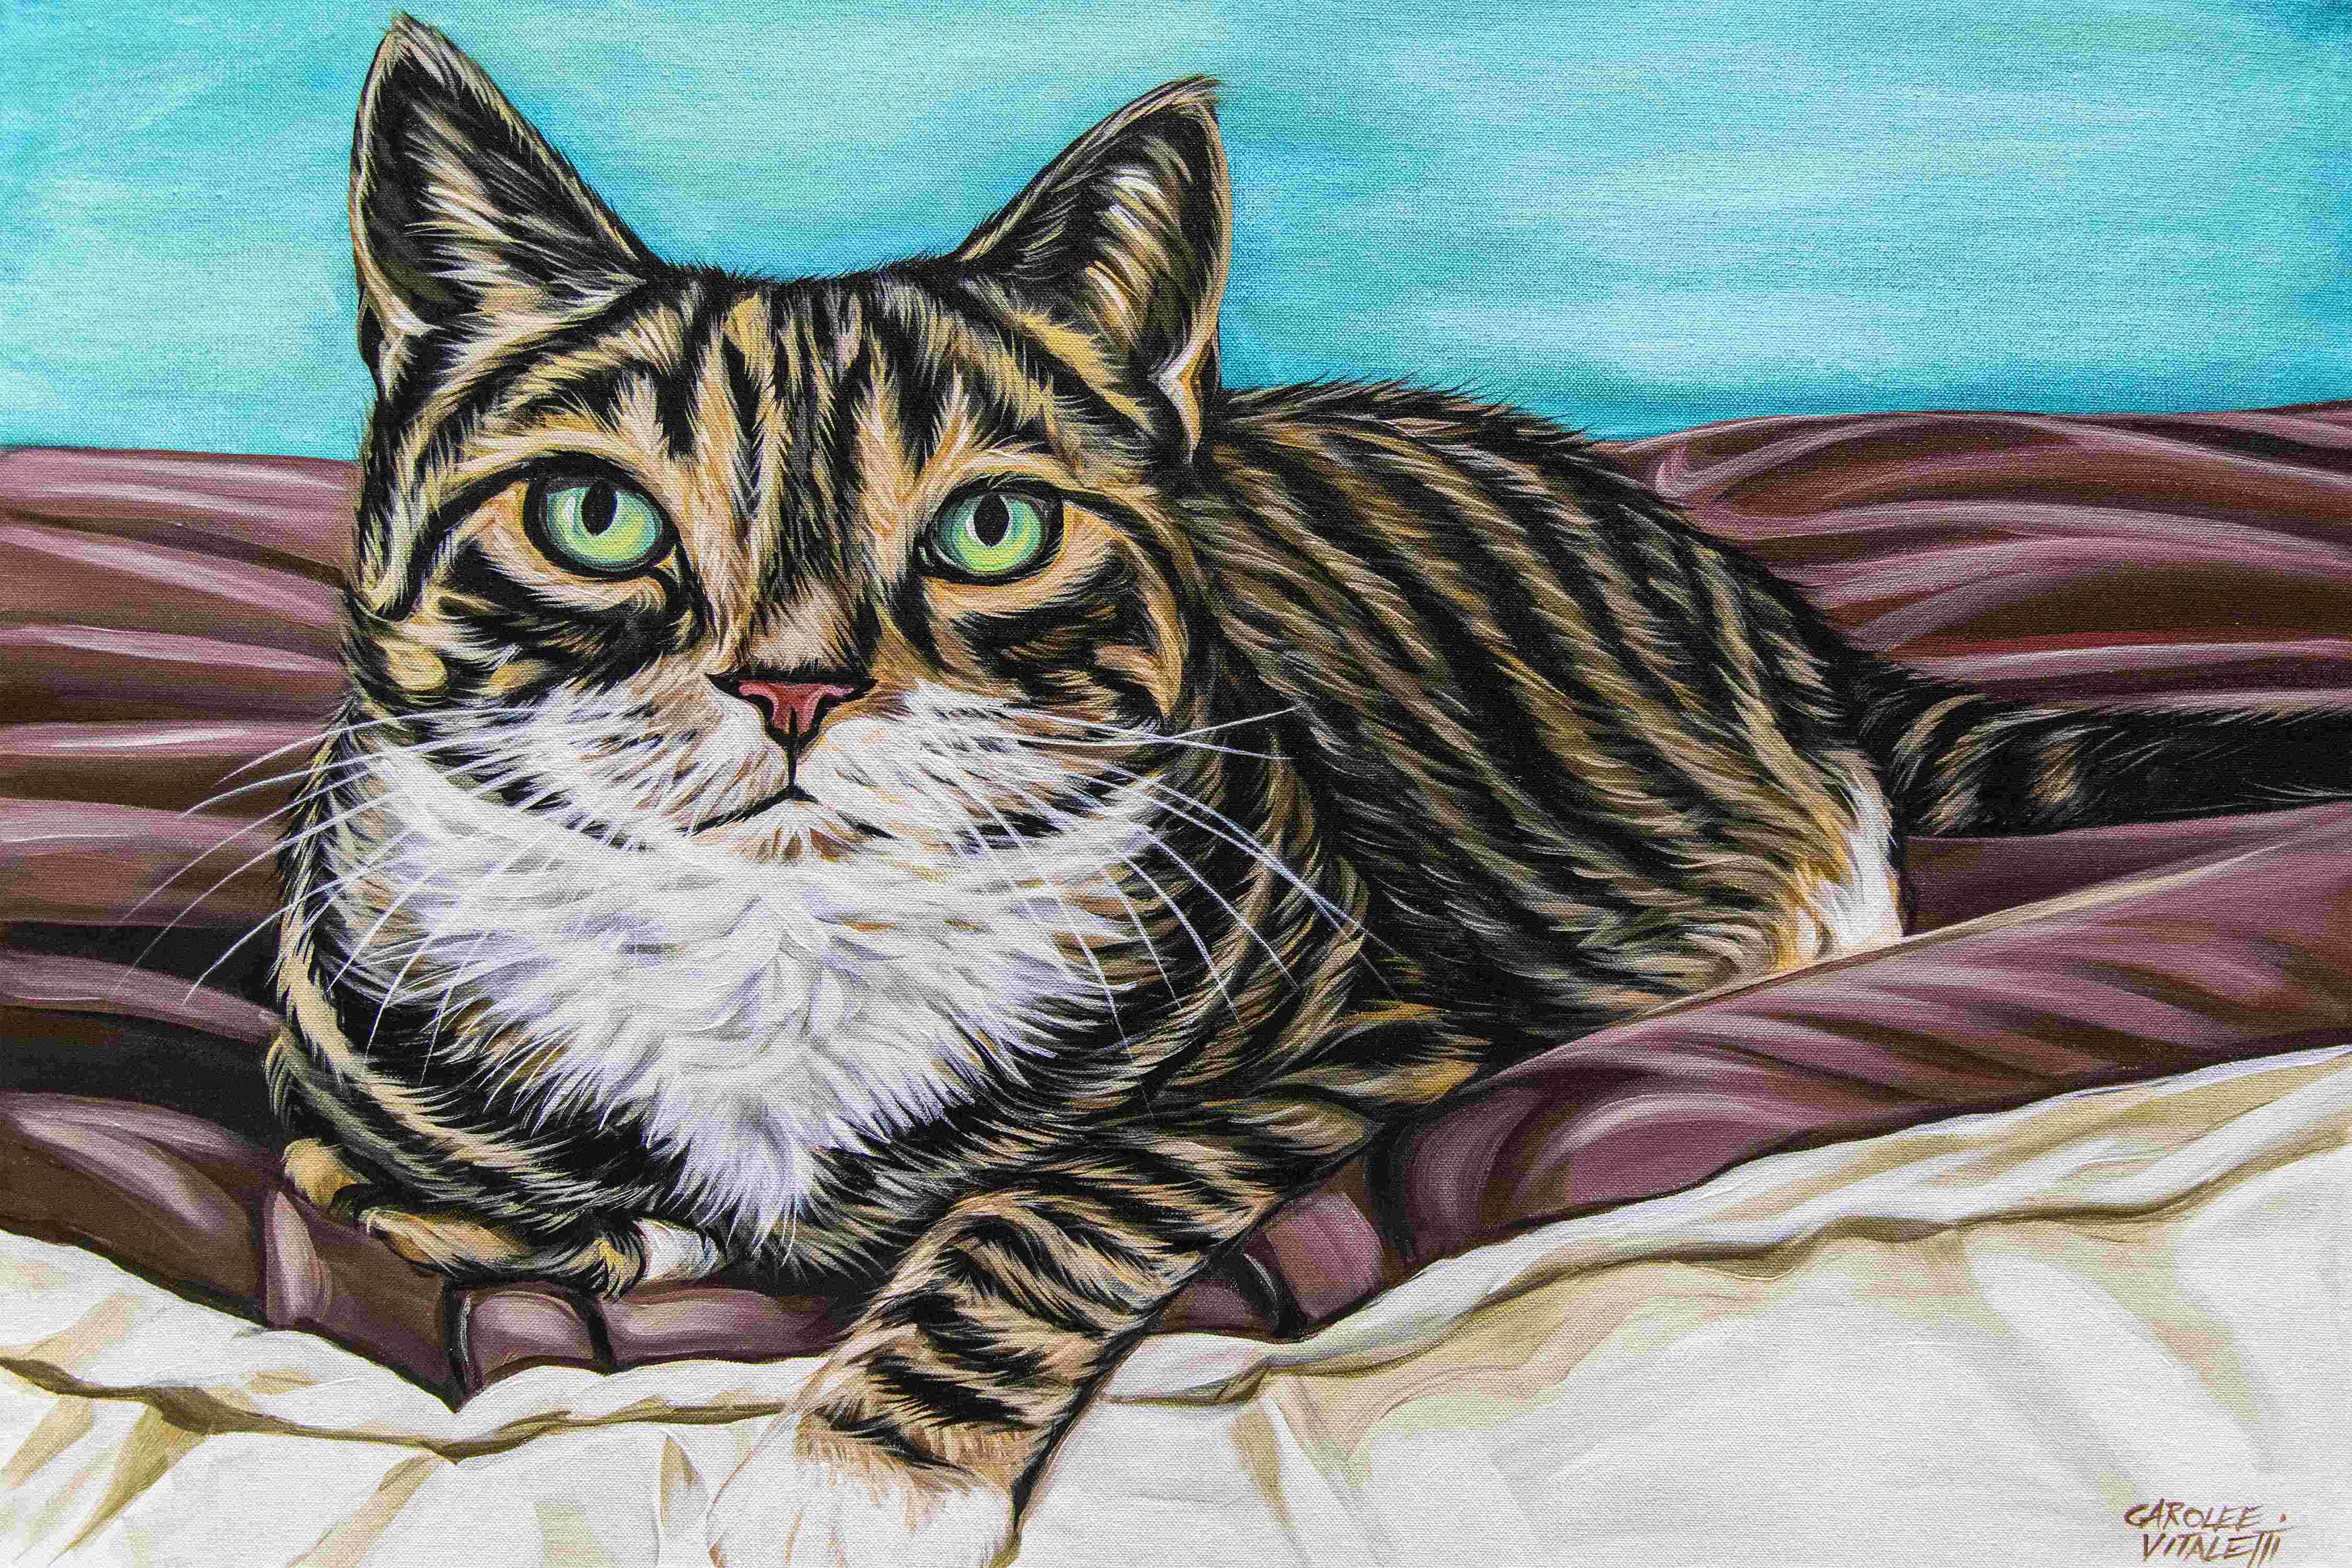 Cat on Books 1 by Cathy Walters - Wrapped Canvas Print Winston Porter Size: 10 H x 10 W x 1.5 D